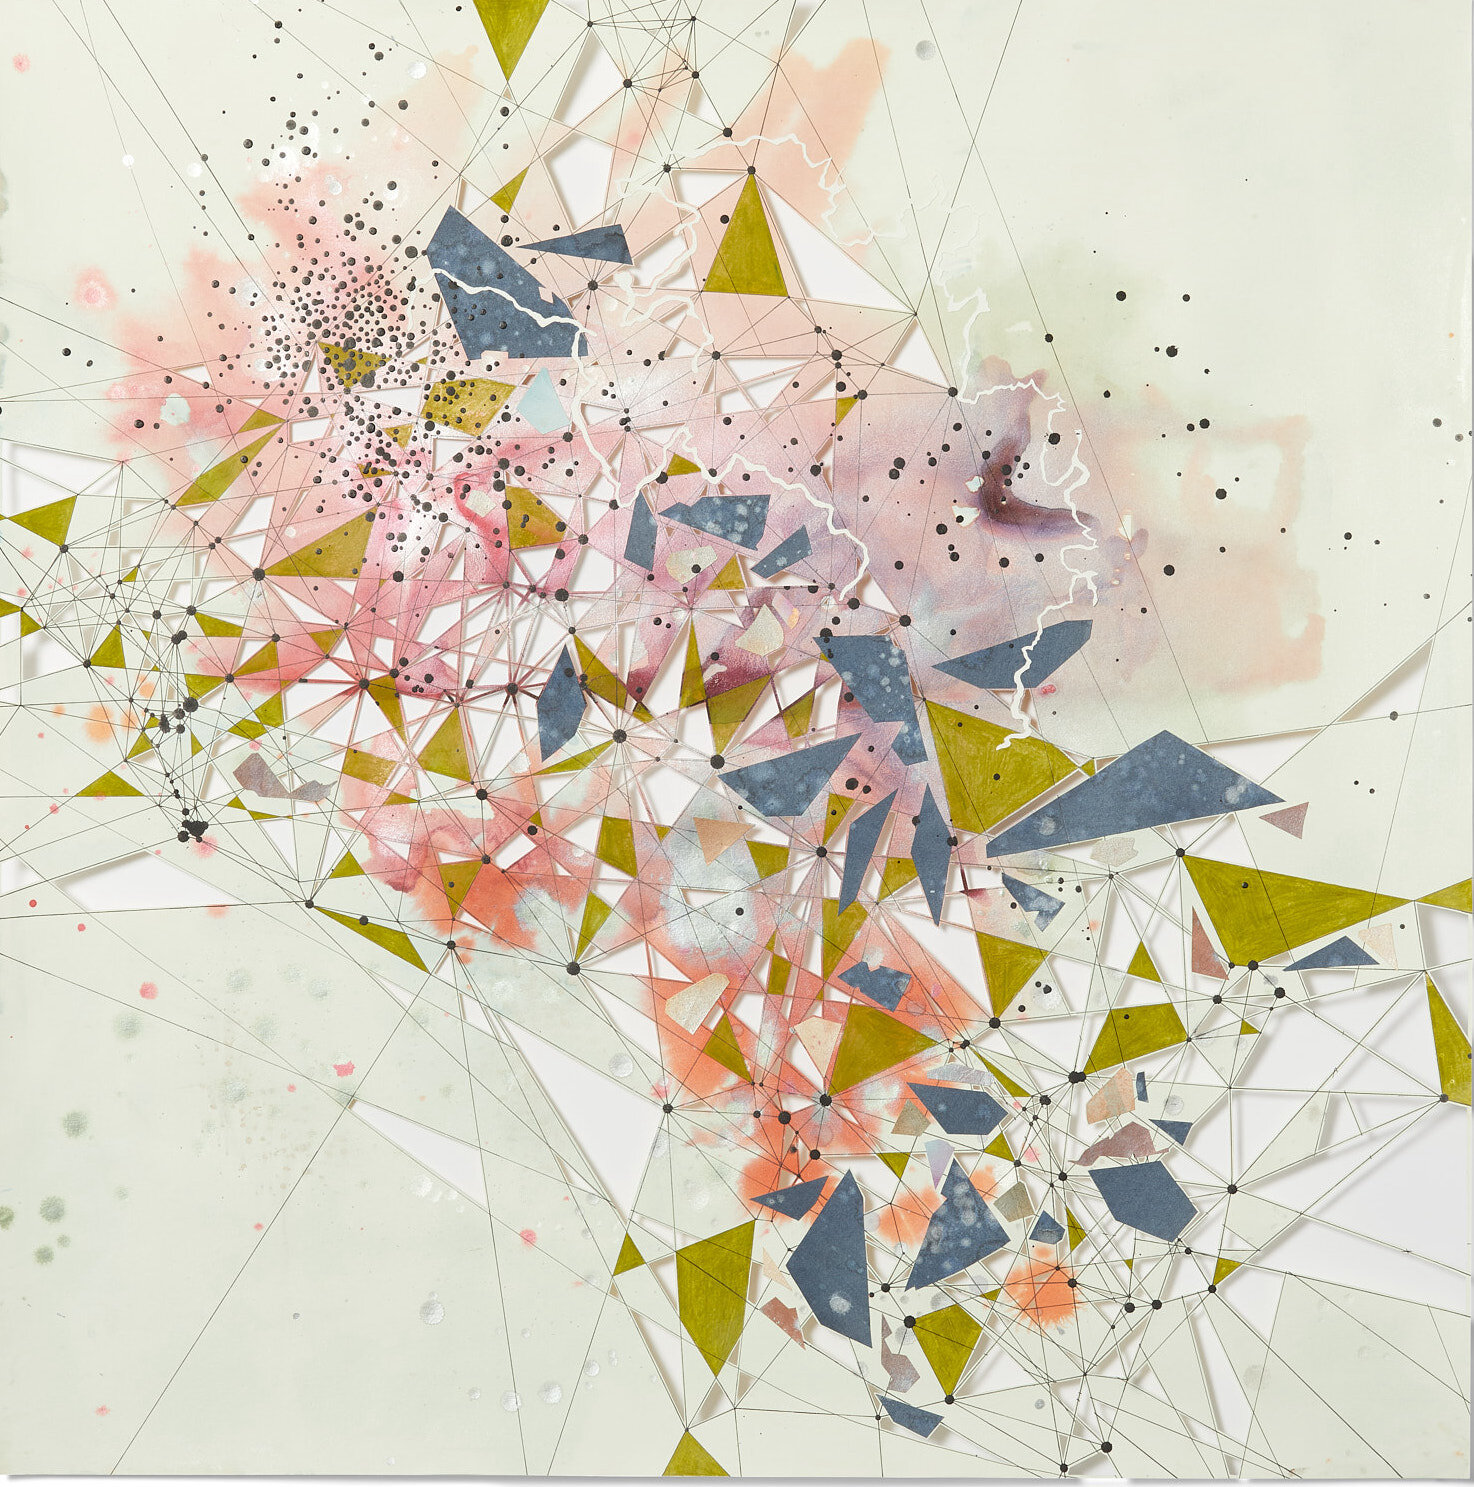  Val Britton,  Reverberation #66 ,   2021, acrylic, ink, colored pencil, collage, and cut out paper, 36 x 36 inches (91.4 x 91.4 cm) 